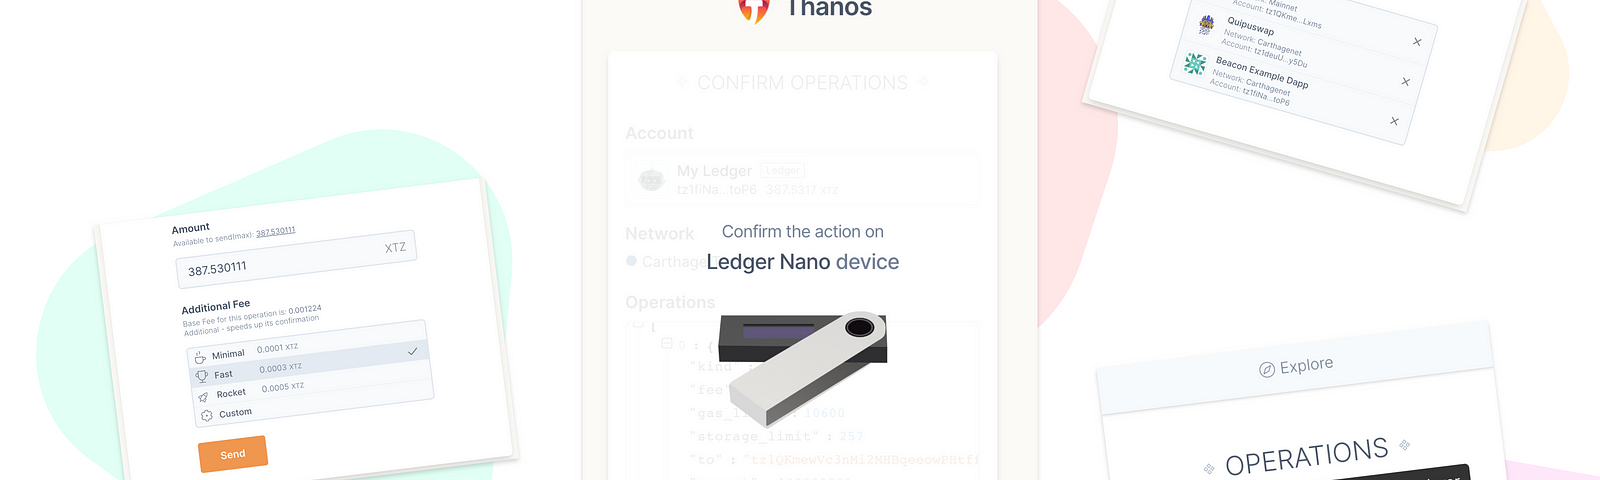 Thanos Wallet Features Highlighted